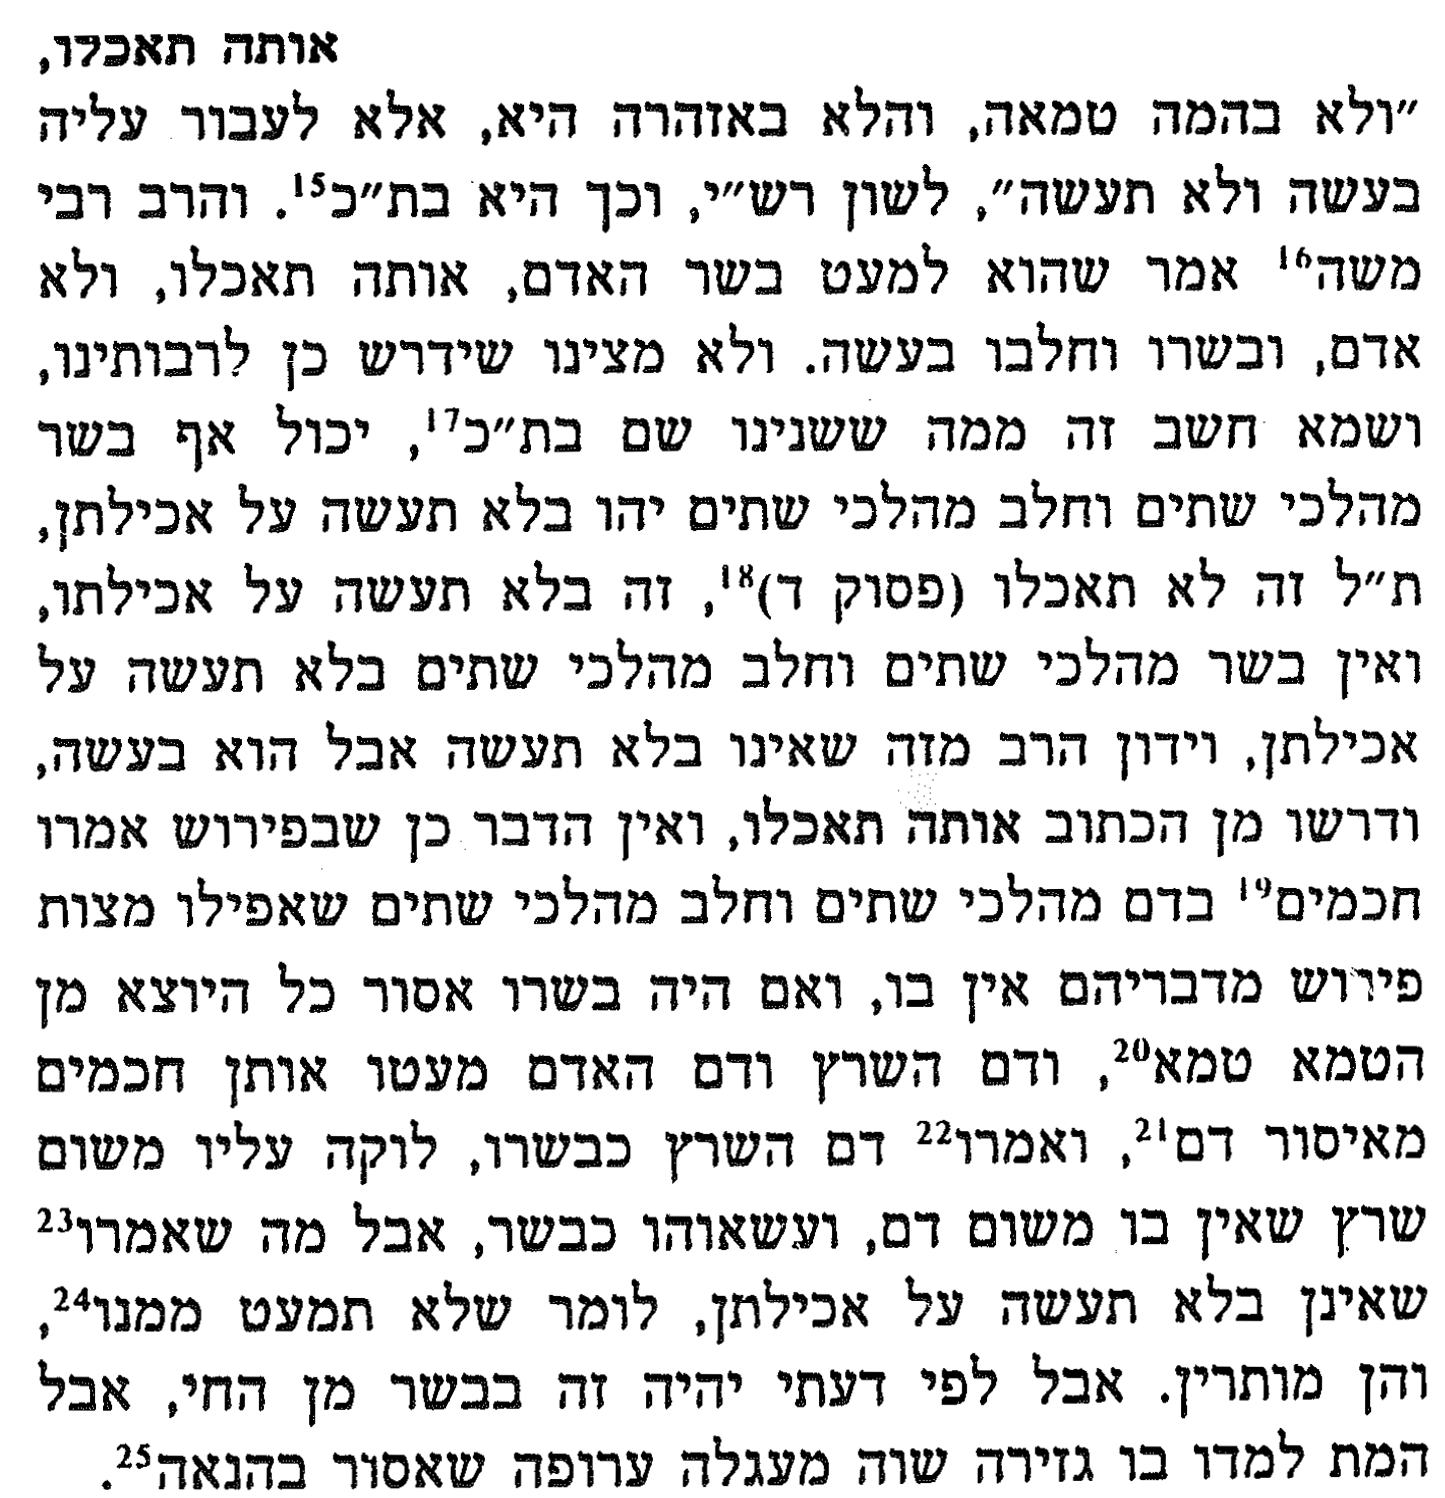 scan from Nachmanides' commentary on the Torah [Hebrew]